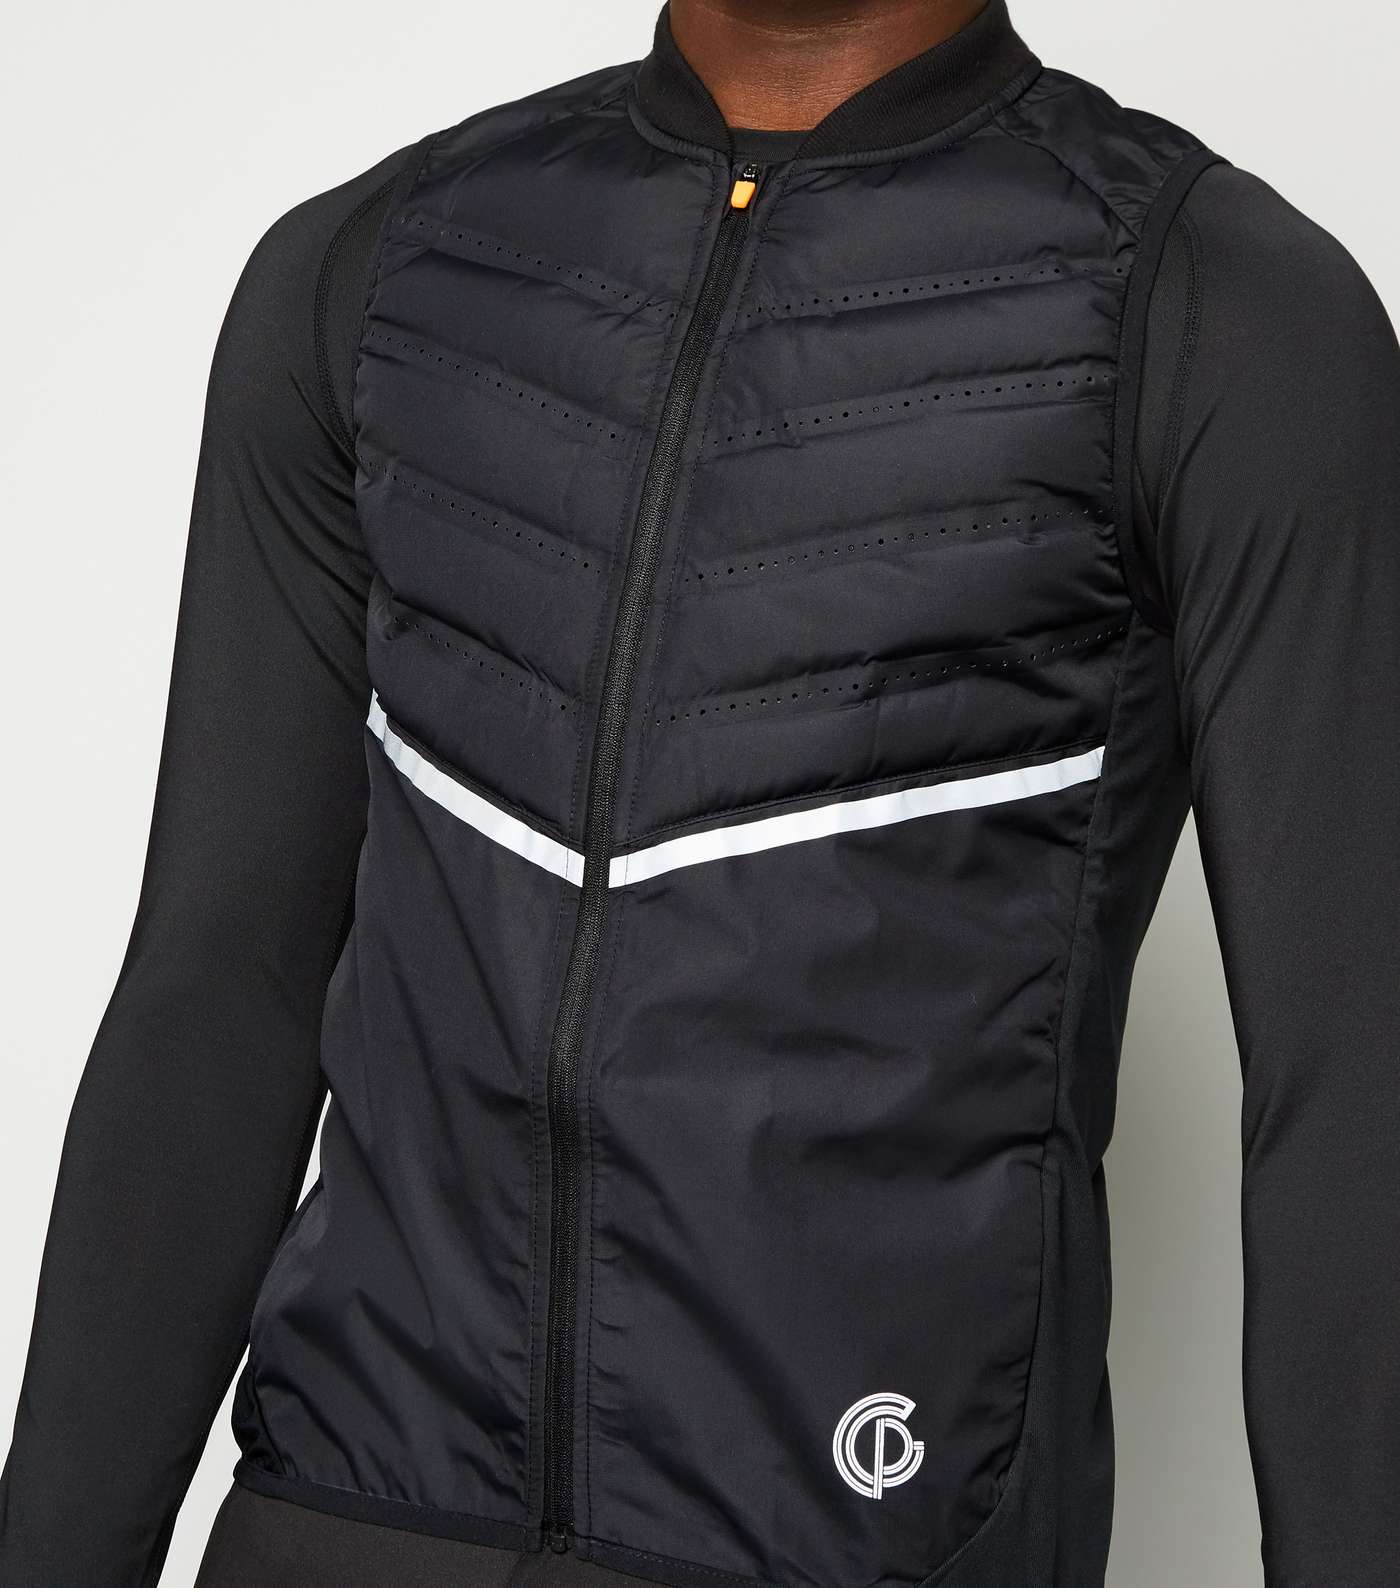 GymPro Black Quilted Sports Gilet Image 5